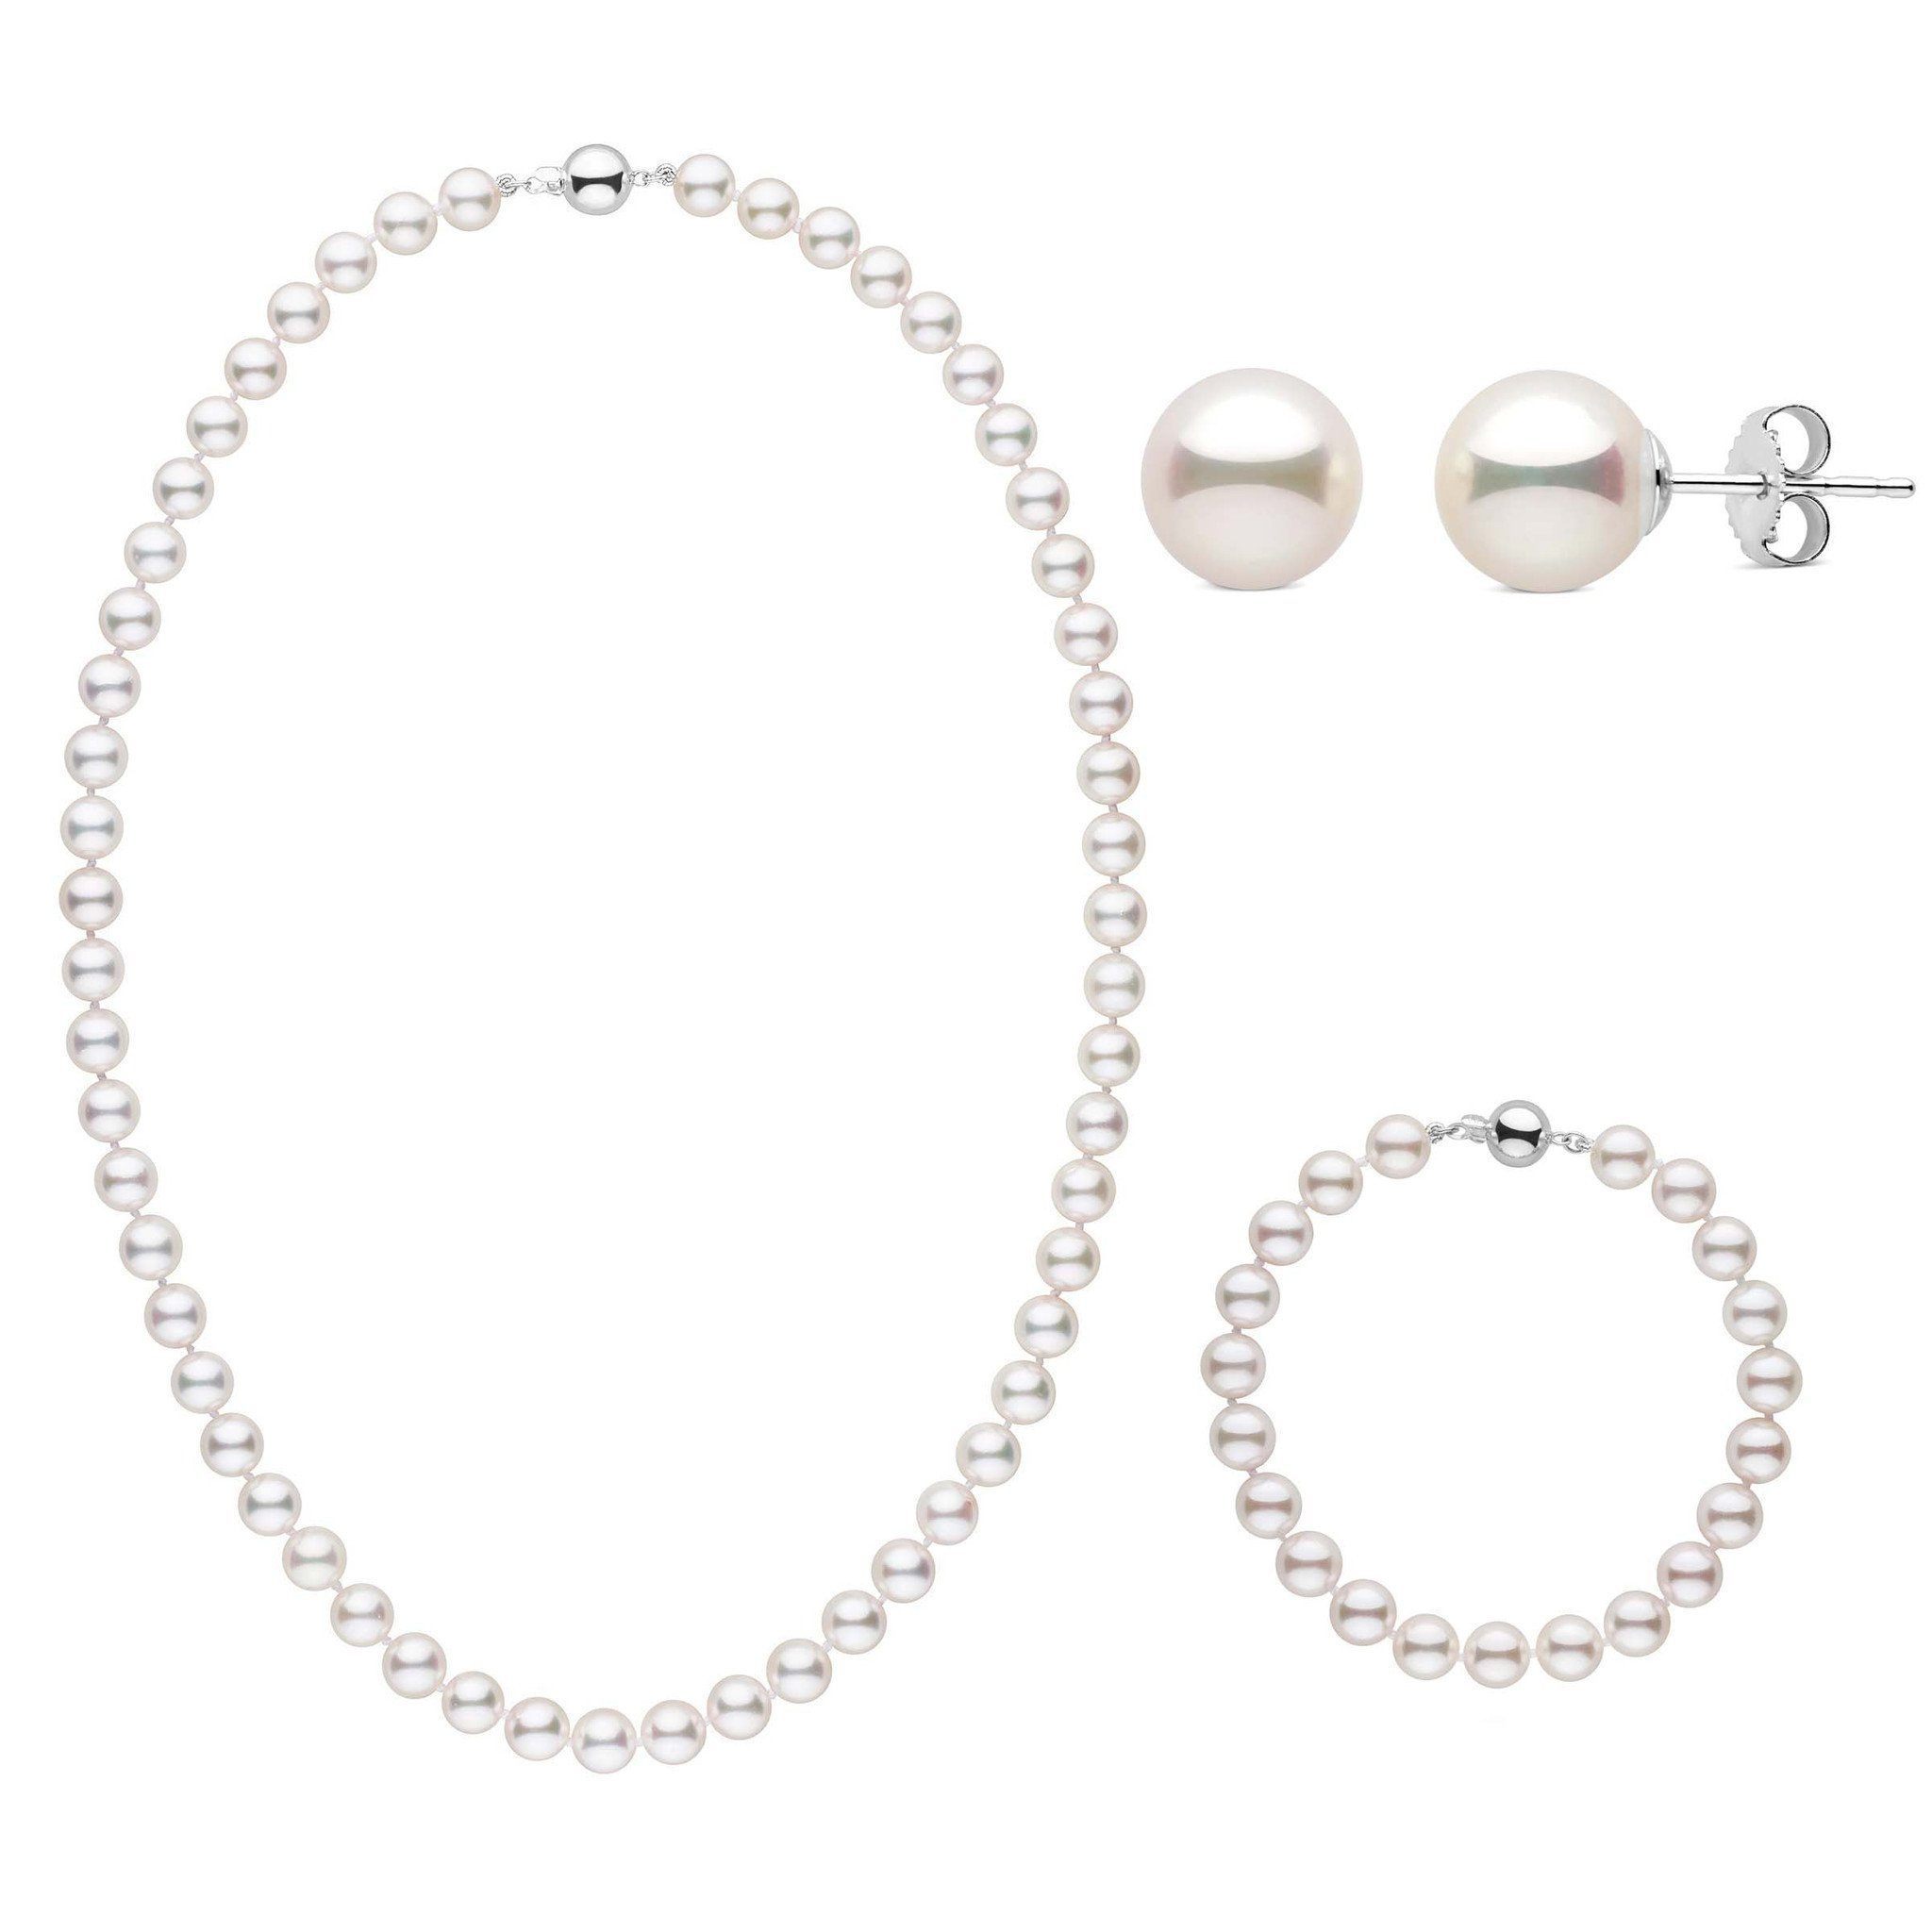 18 Inch 3 Piece Set of 7.5-8.0 mm AAA White Akoya Pearls necklace Bracelet Earrings White Gold